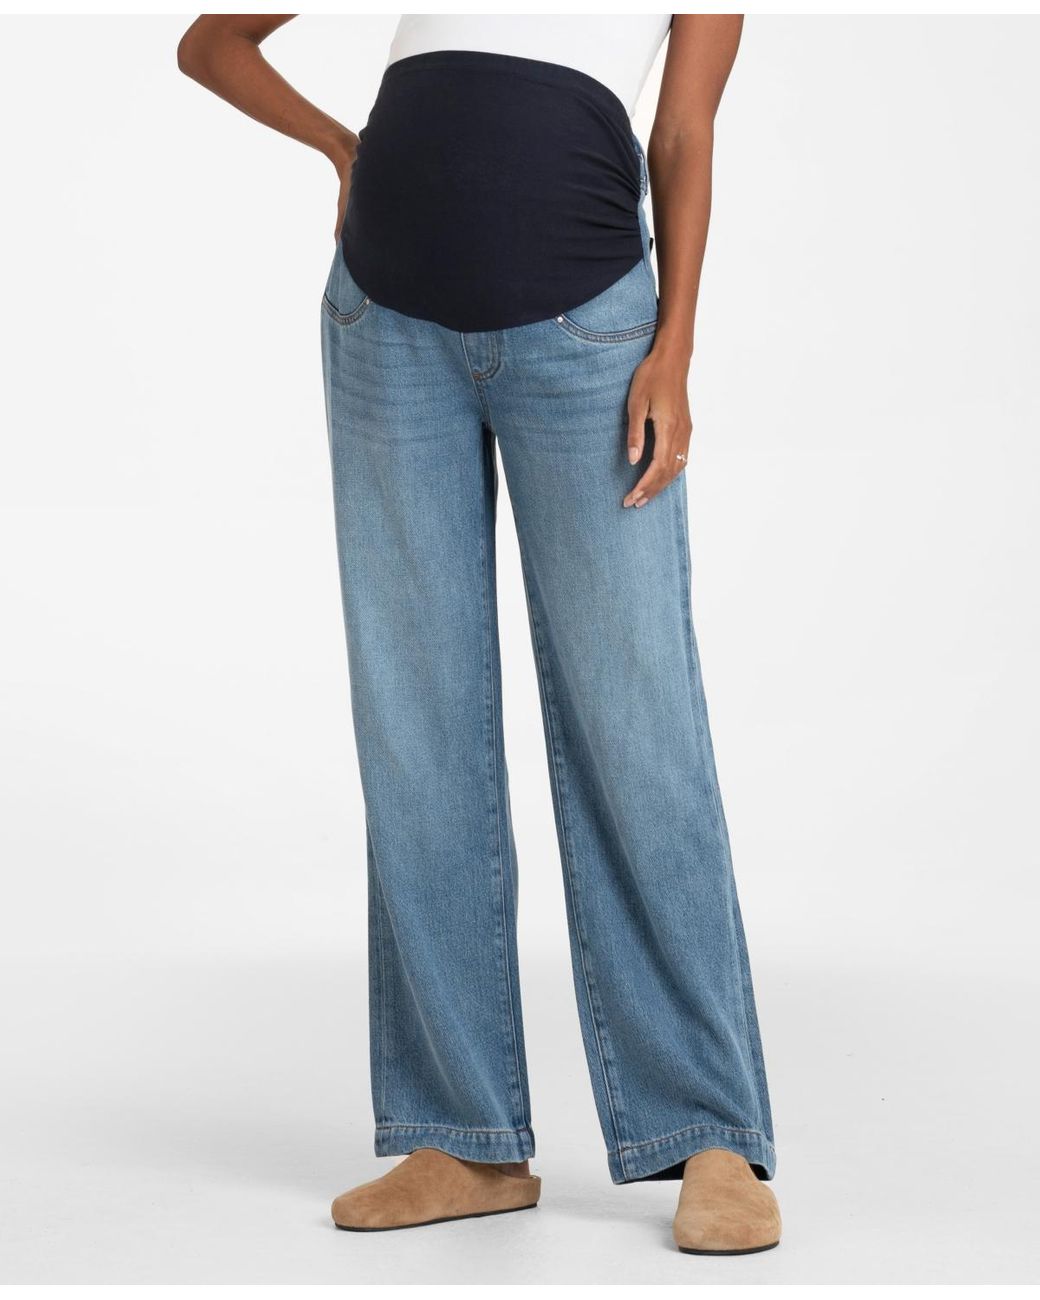 Seraphine Maternity Mid Bump Wide Leg Maternity Jeans in Blue